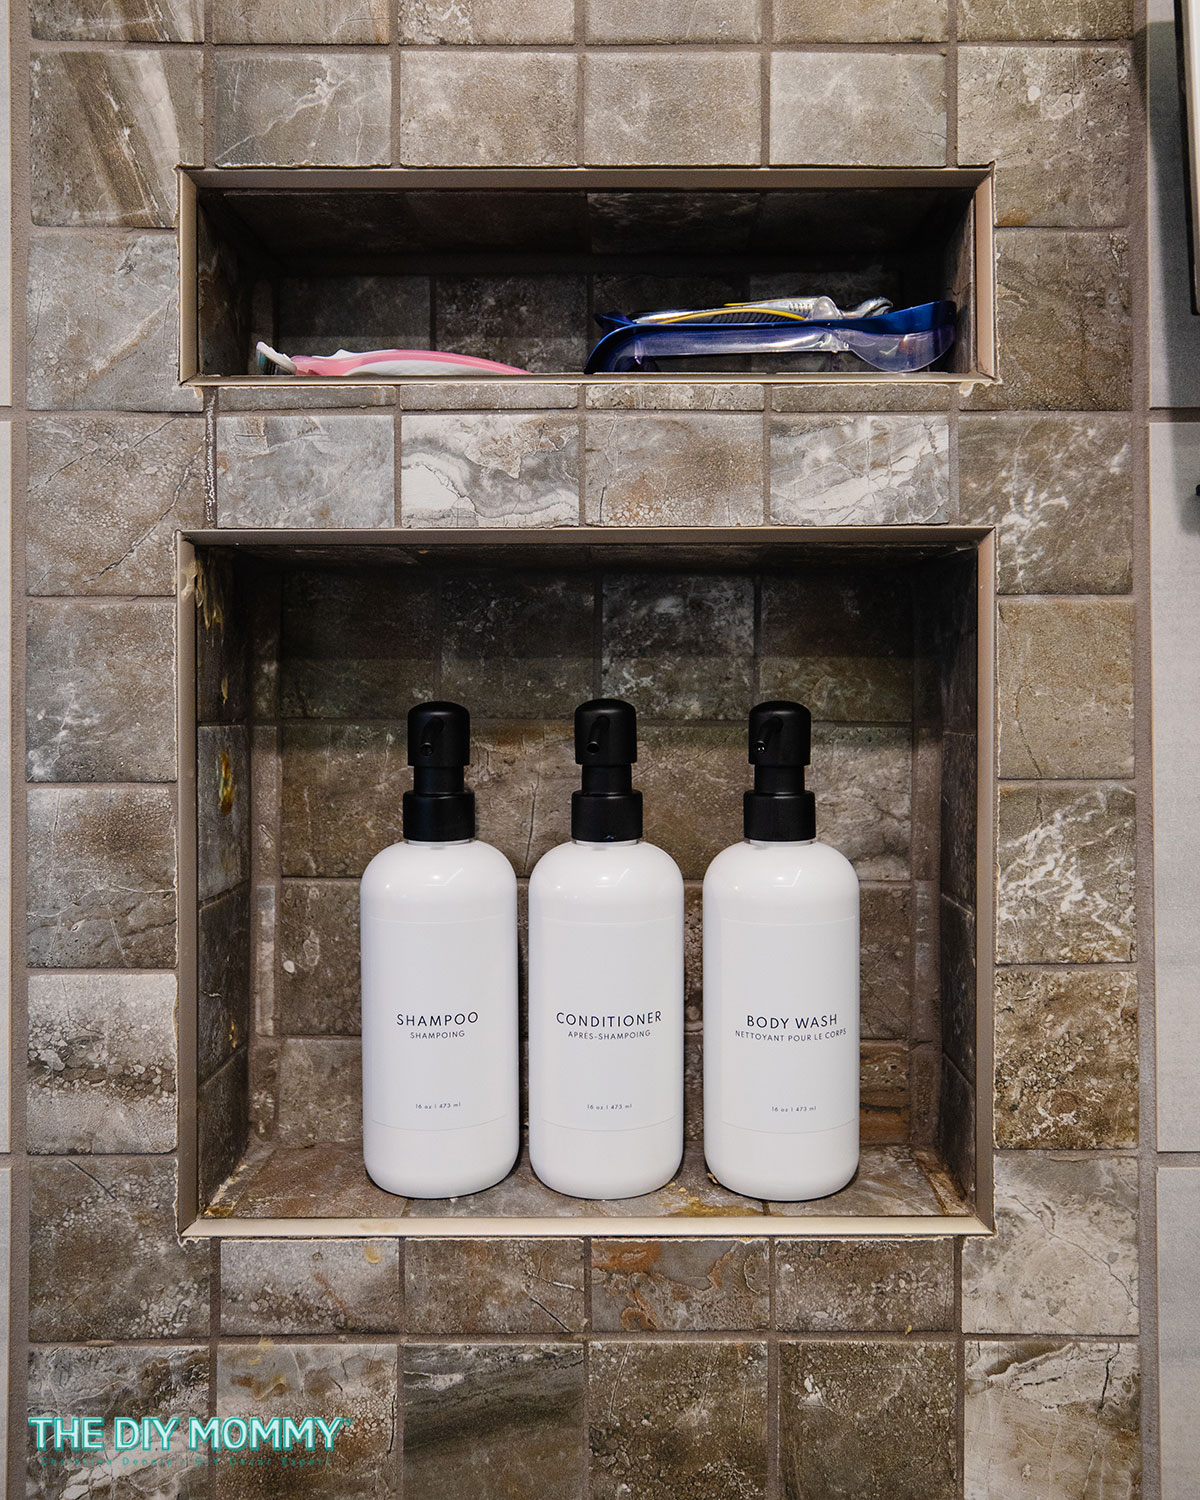 A set of 3 white soap/shampoo dispensing bottles with black pumps displayed in a shower. Could also be used as kitchen soap dispensers